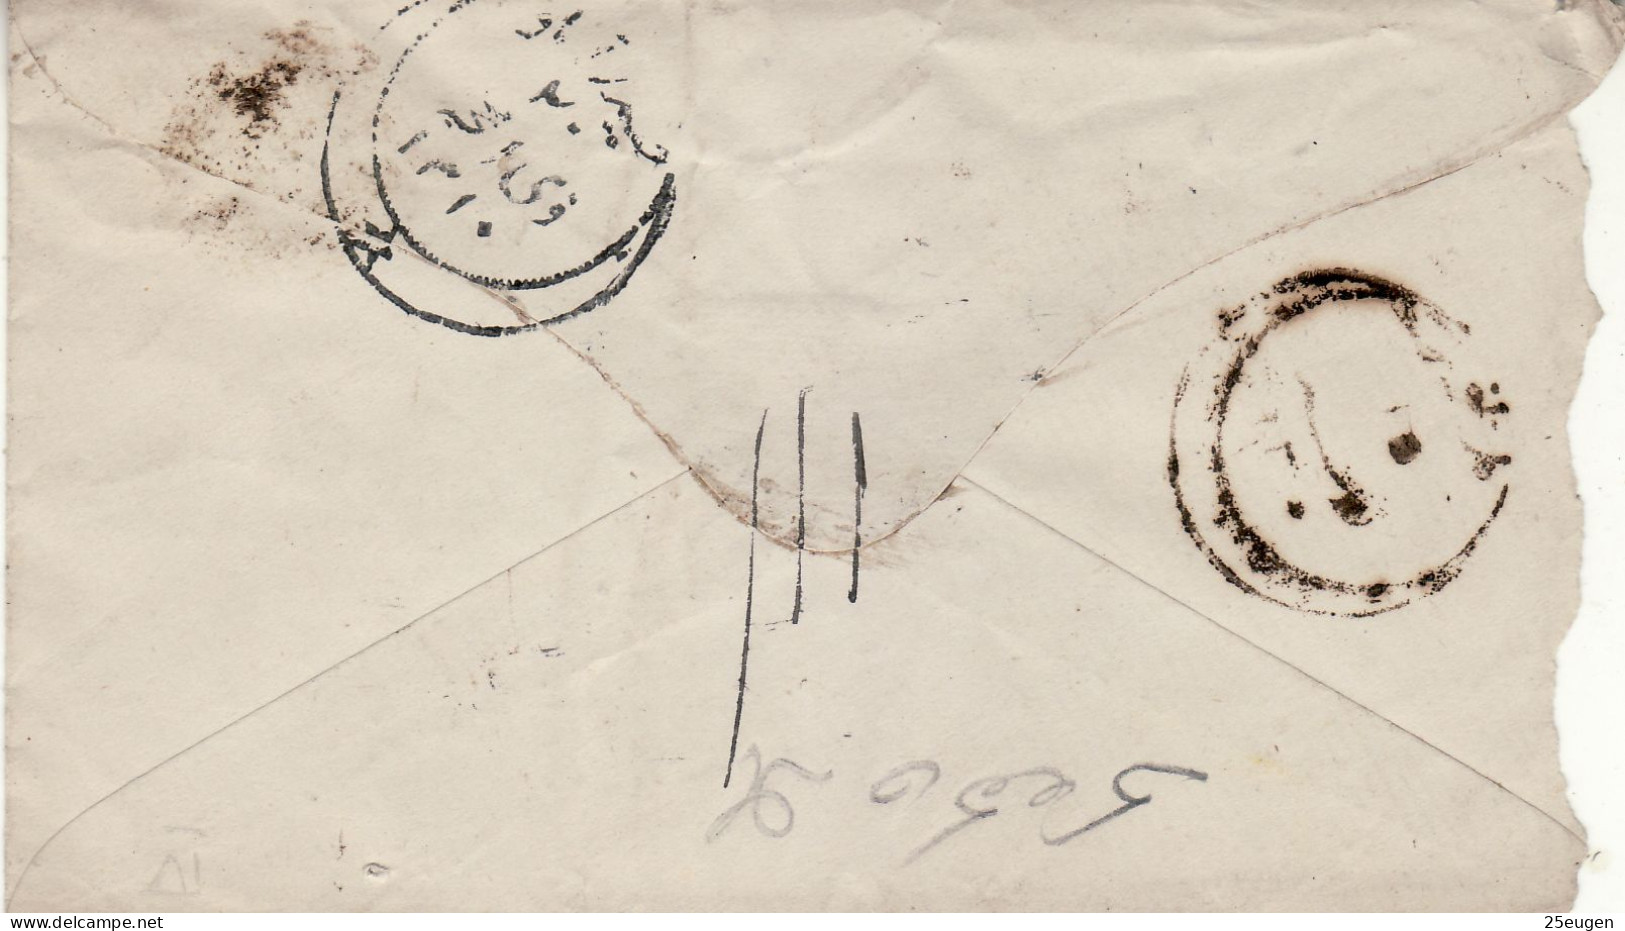 HYDERABAD 1887  POSTAL STATIONERY COVER USED - Hyderabad